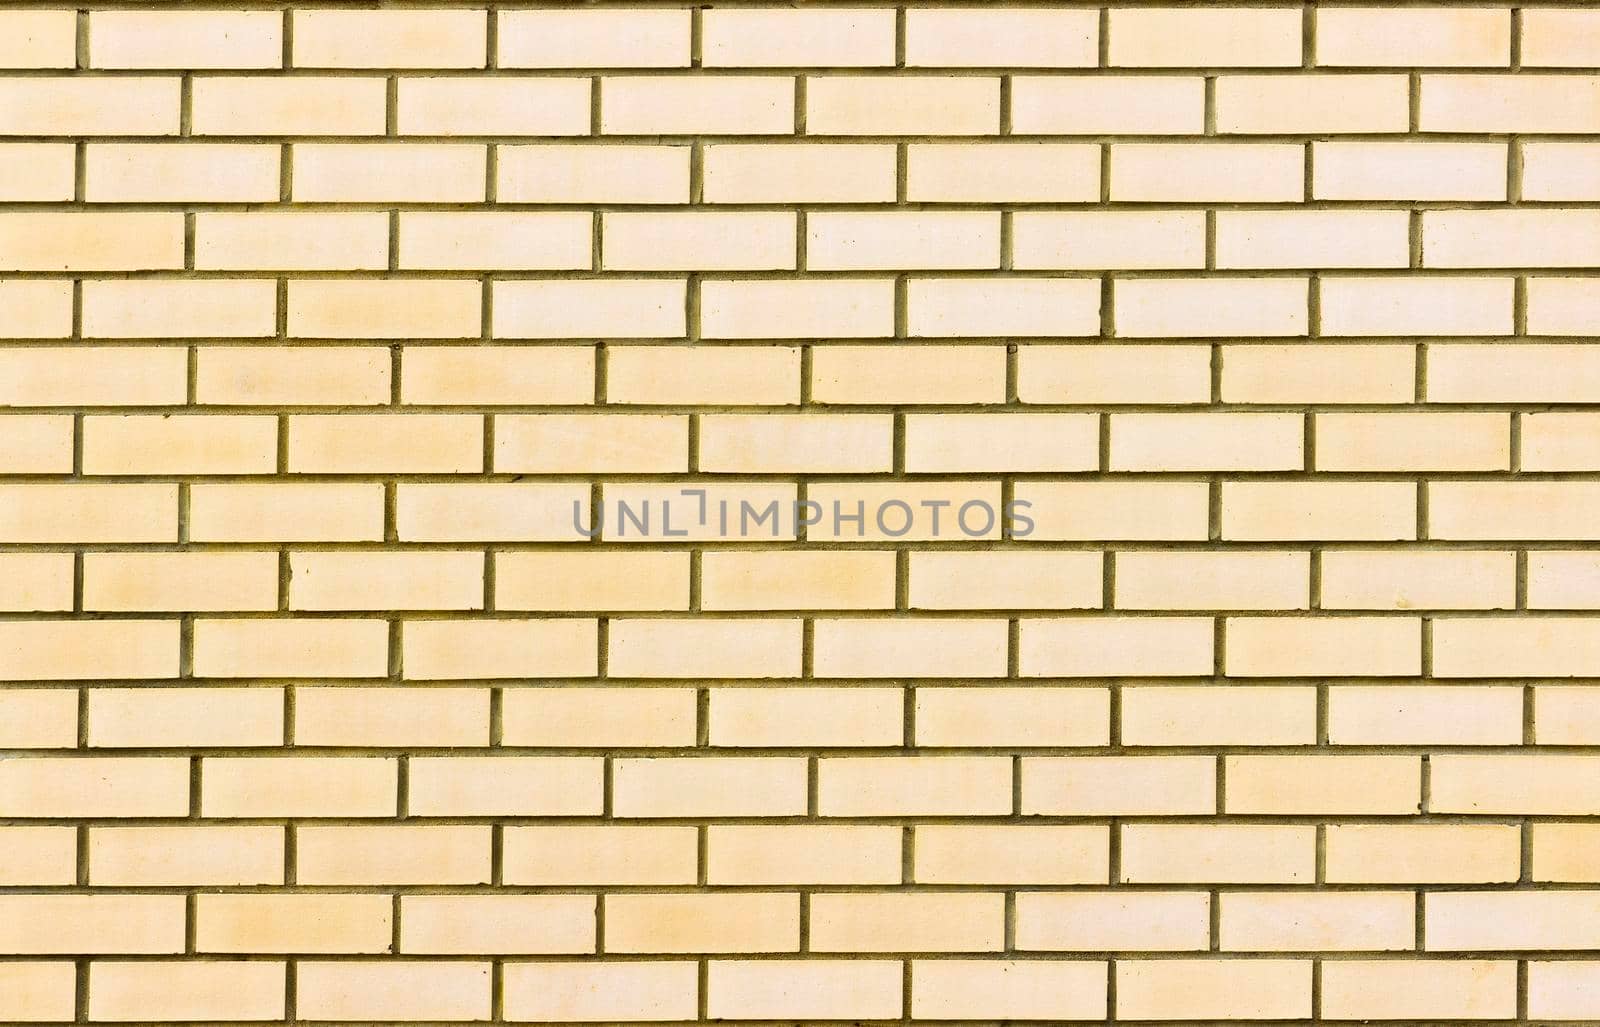 Photograph of a brick wall pattern. The bricks are light yellow in colour.